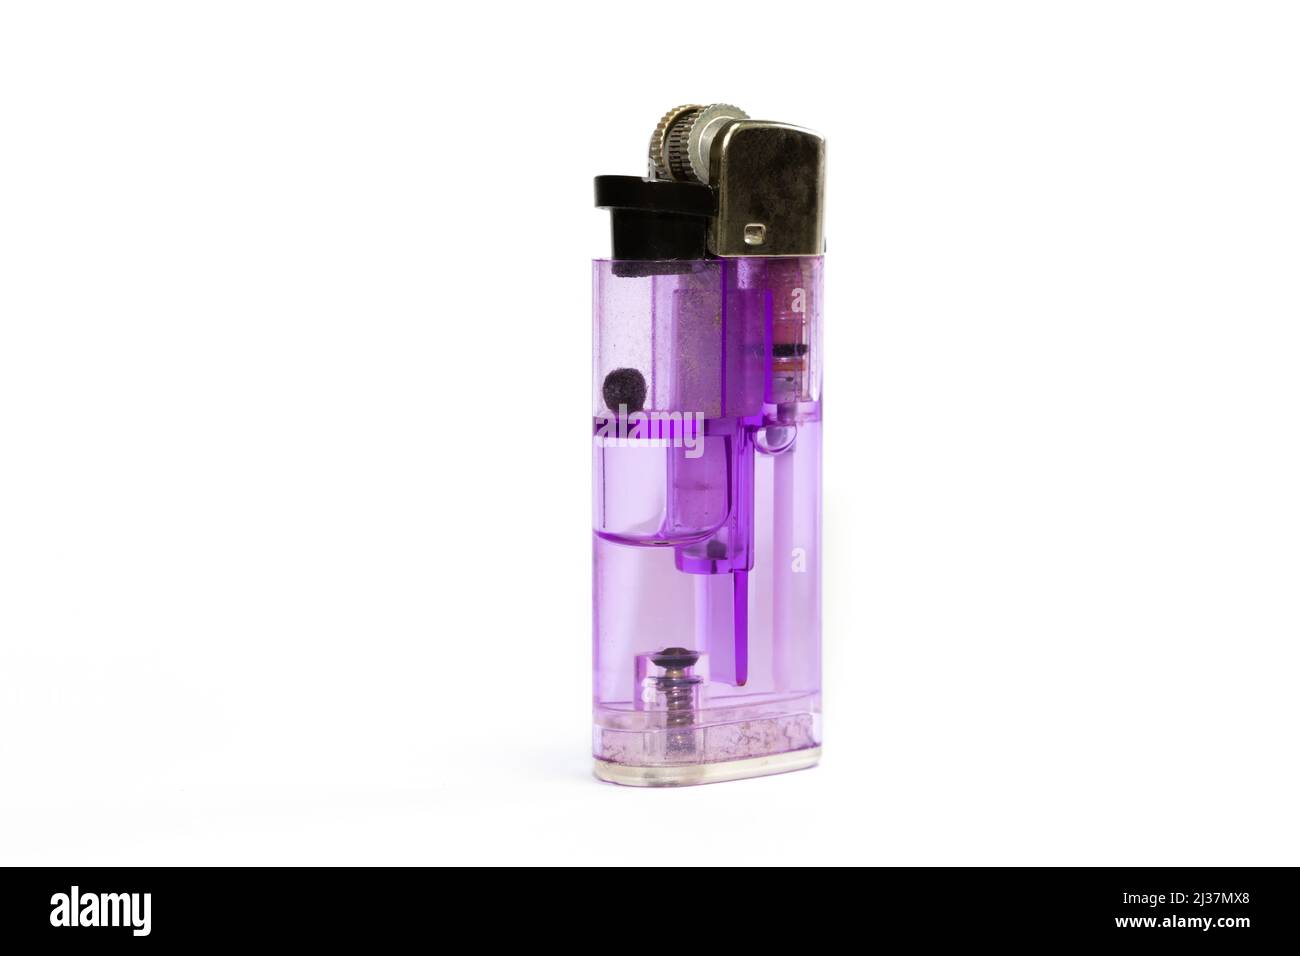 Purple colored plastic lighter on an isolated white background. Stock Photo